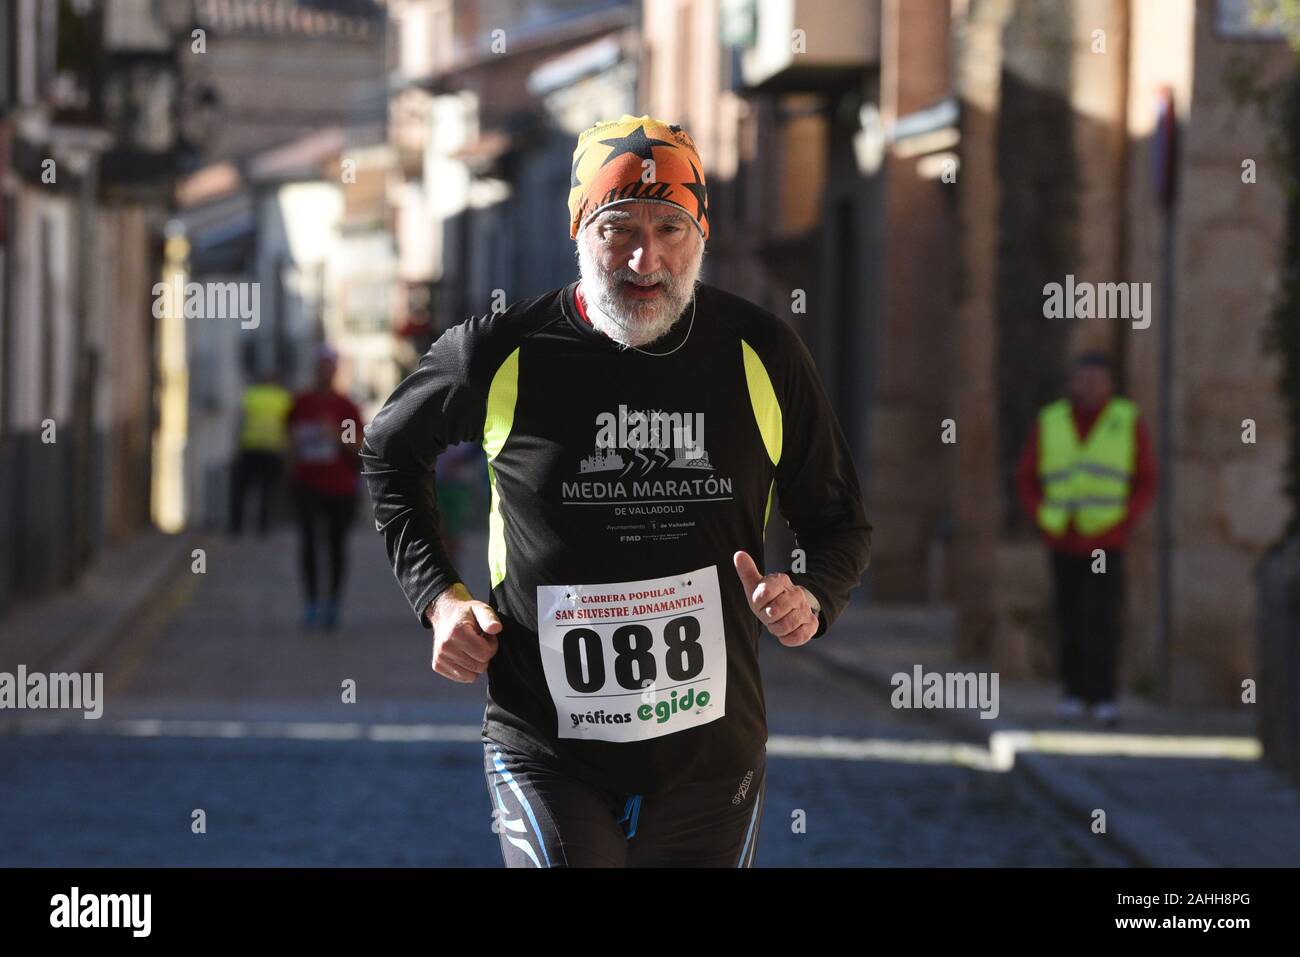 A man takes part during the race.During the last days of the year, hundreds of Spanish towns and cities celebrate popular races called San Silvestre. The most famous, known as San Silvestre Vallecana, will be celebrated next Tuesday, 31 December in Madrid. Stock Photo